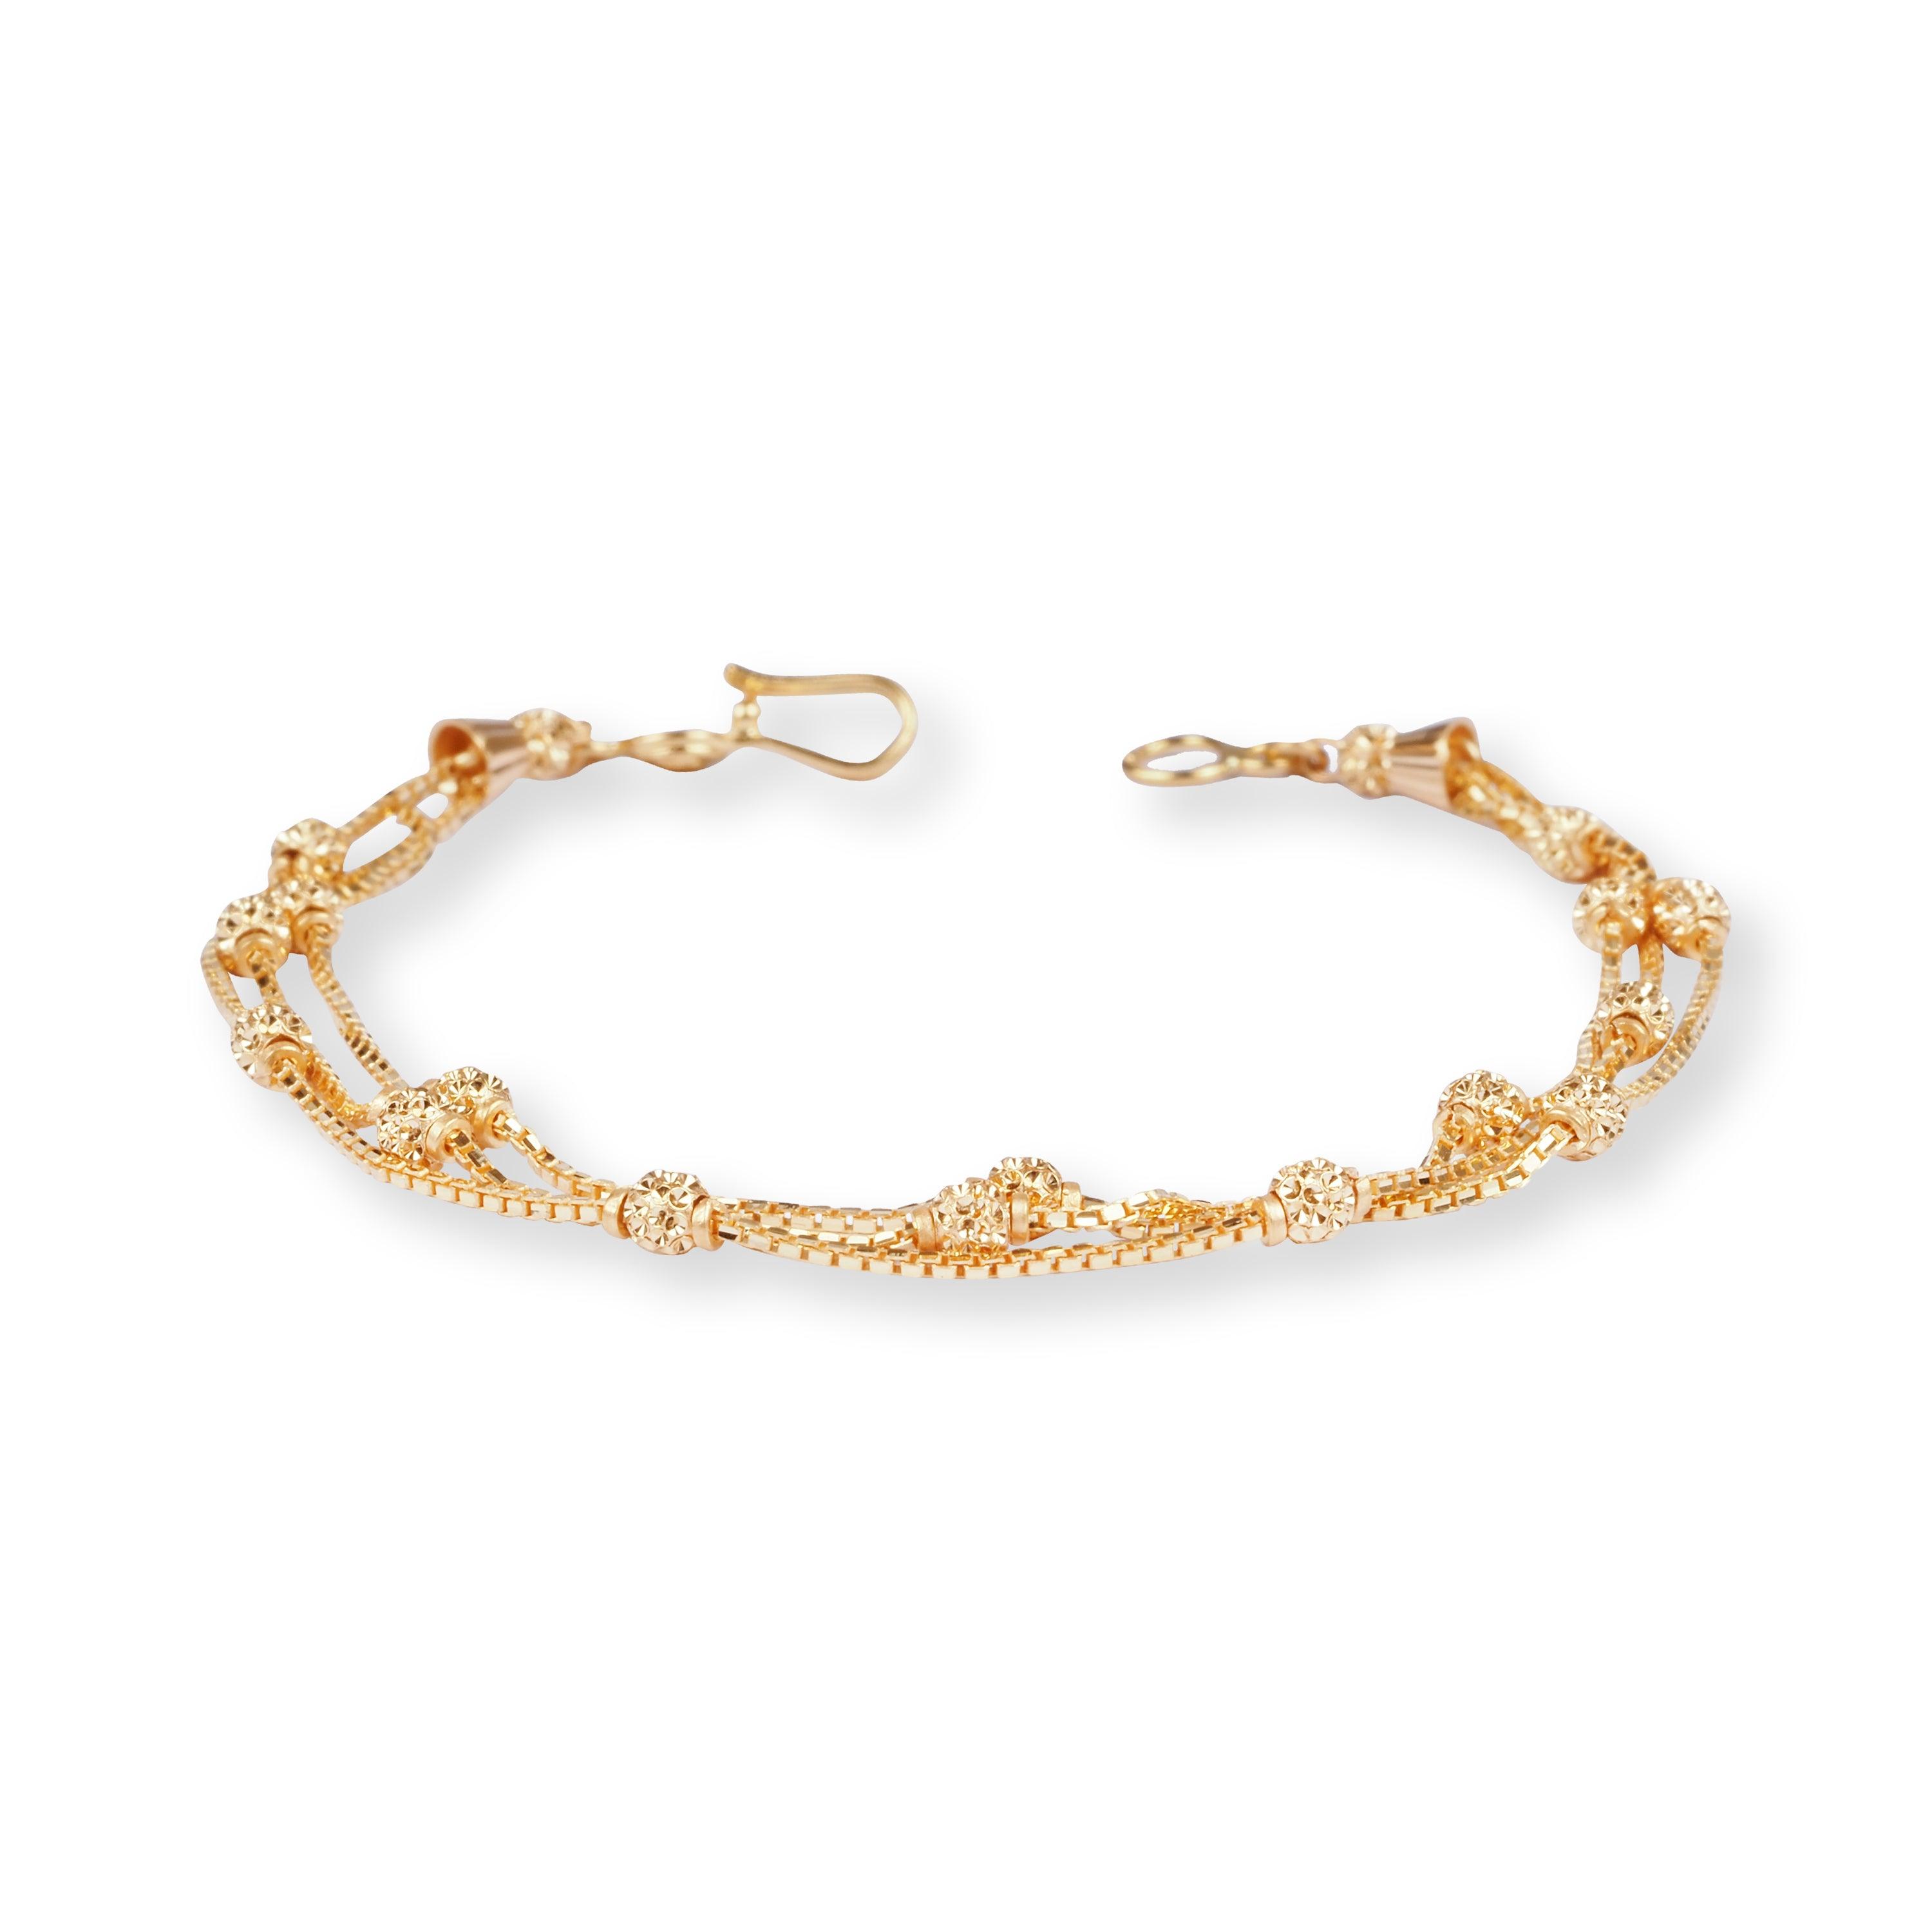 22ct Gold Three Row Bracelet with Diamond Cut Beads and Hook Clasp LBR-8493 - Minar Jewellers